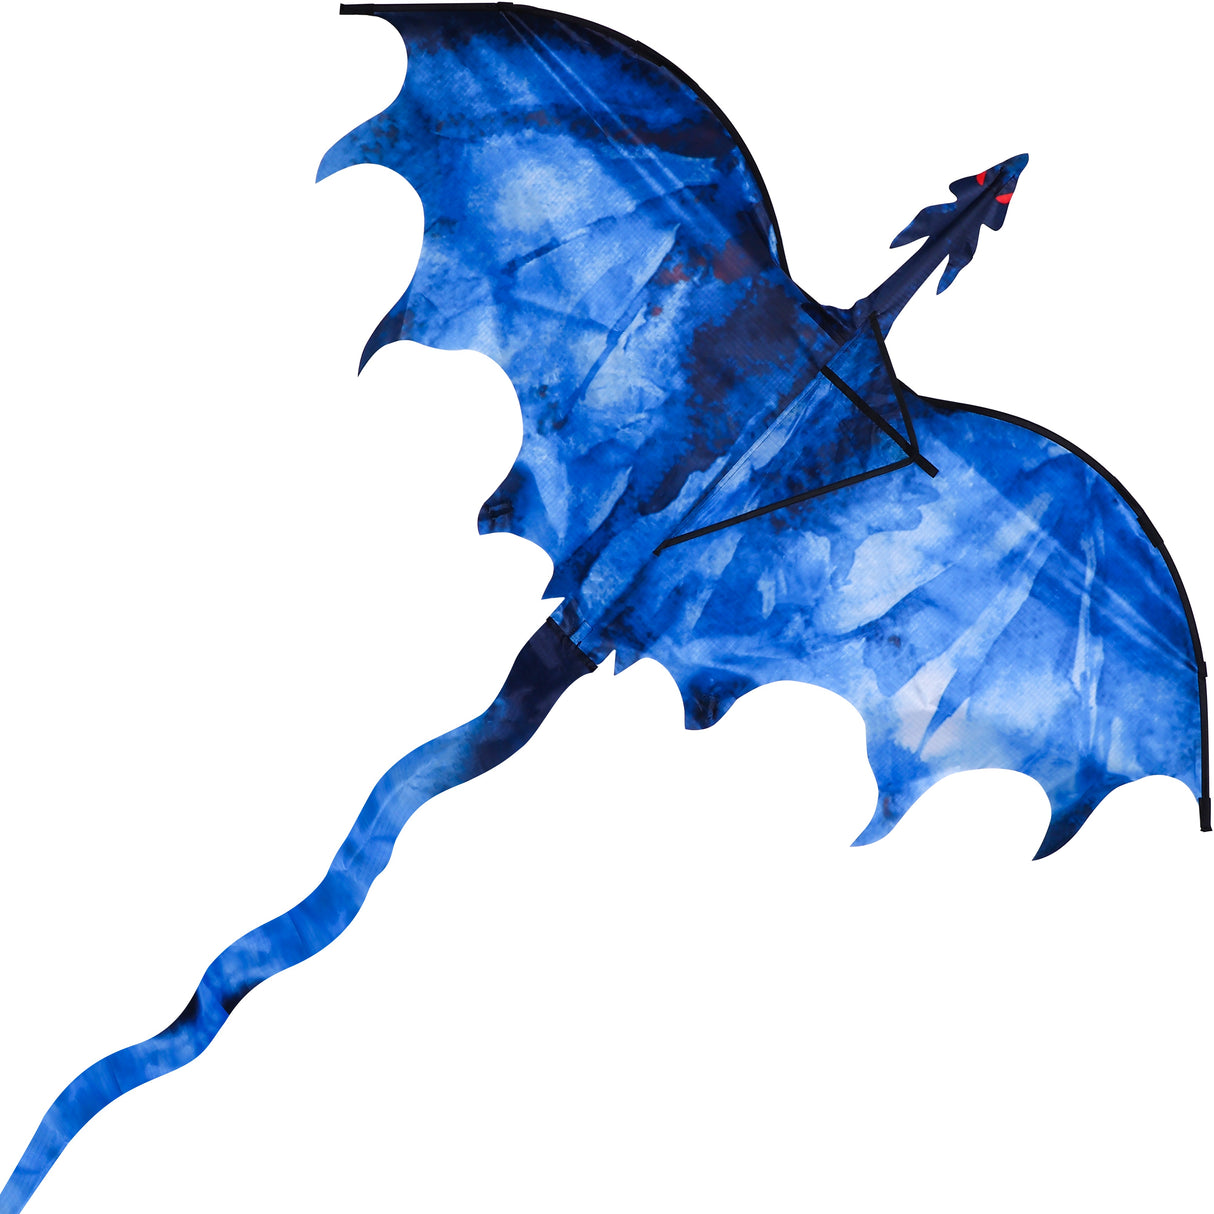 JEKOSEN Ice/Fiery Dragon 54" Huge Kite Easy to Fly Suitable for Children and Adults Beach Park Outdoor Activities - GexWorldwide